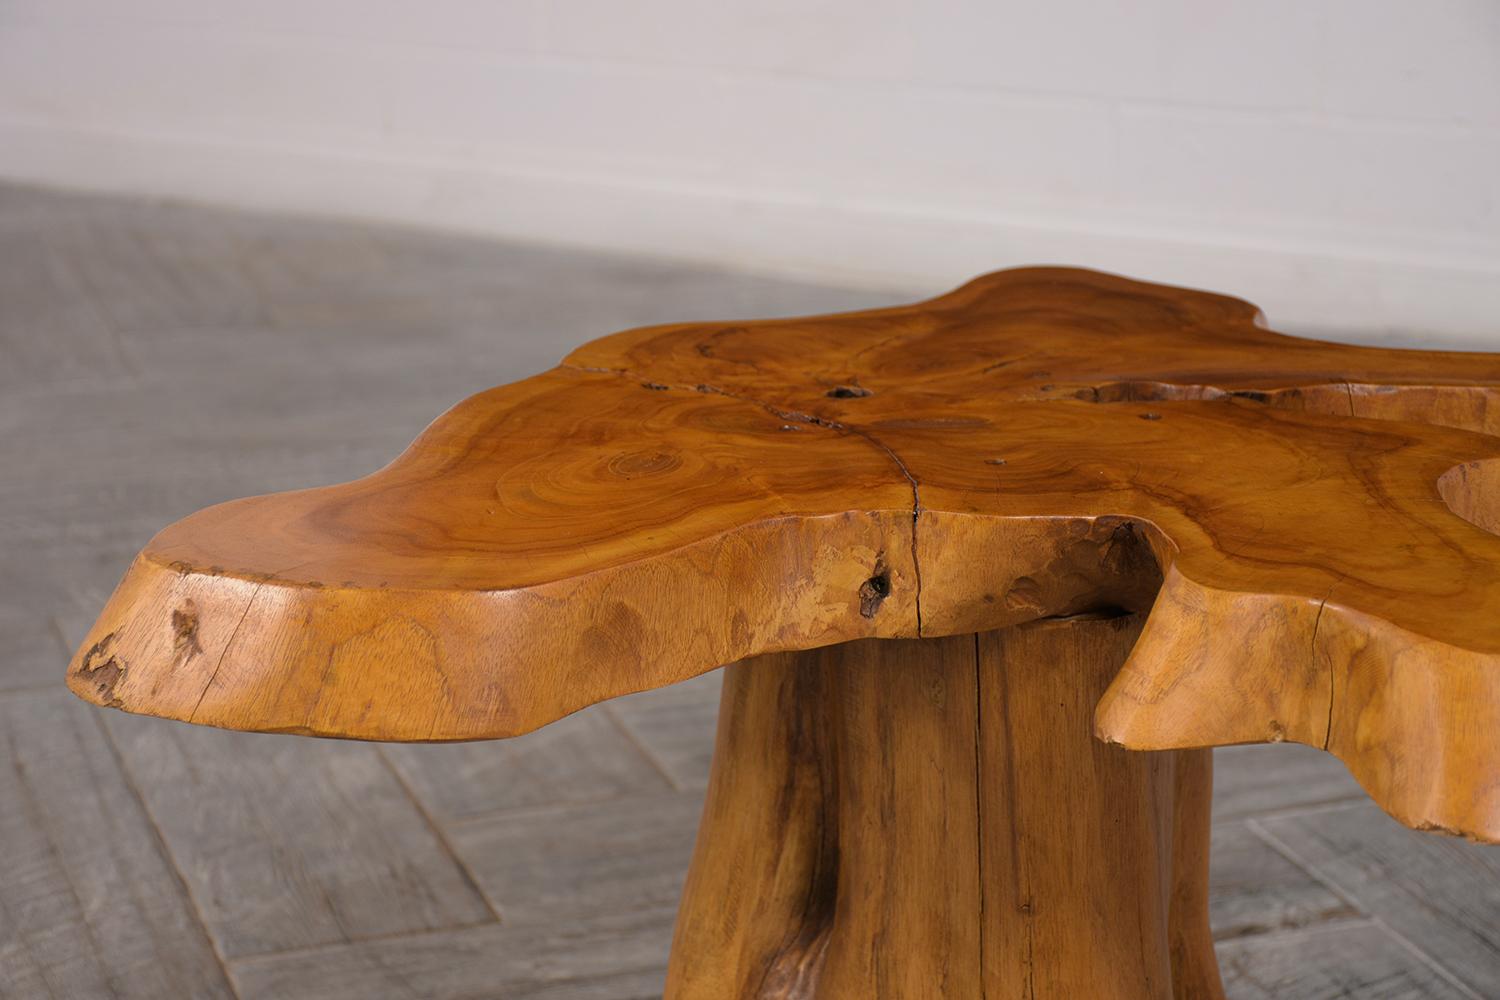 Vintage tree root side table. Has a 2-inch thick wood slab top, with freeform design root pedestal legs. Its stain in its natural color finish, with a French wax and has been polished to give a smoother finish. Can also be used as a stool, or bench.